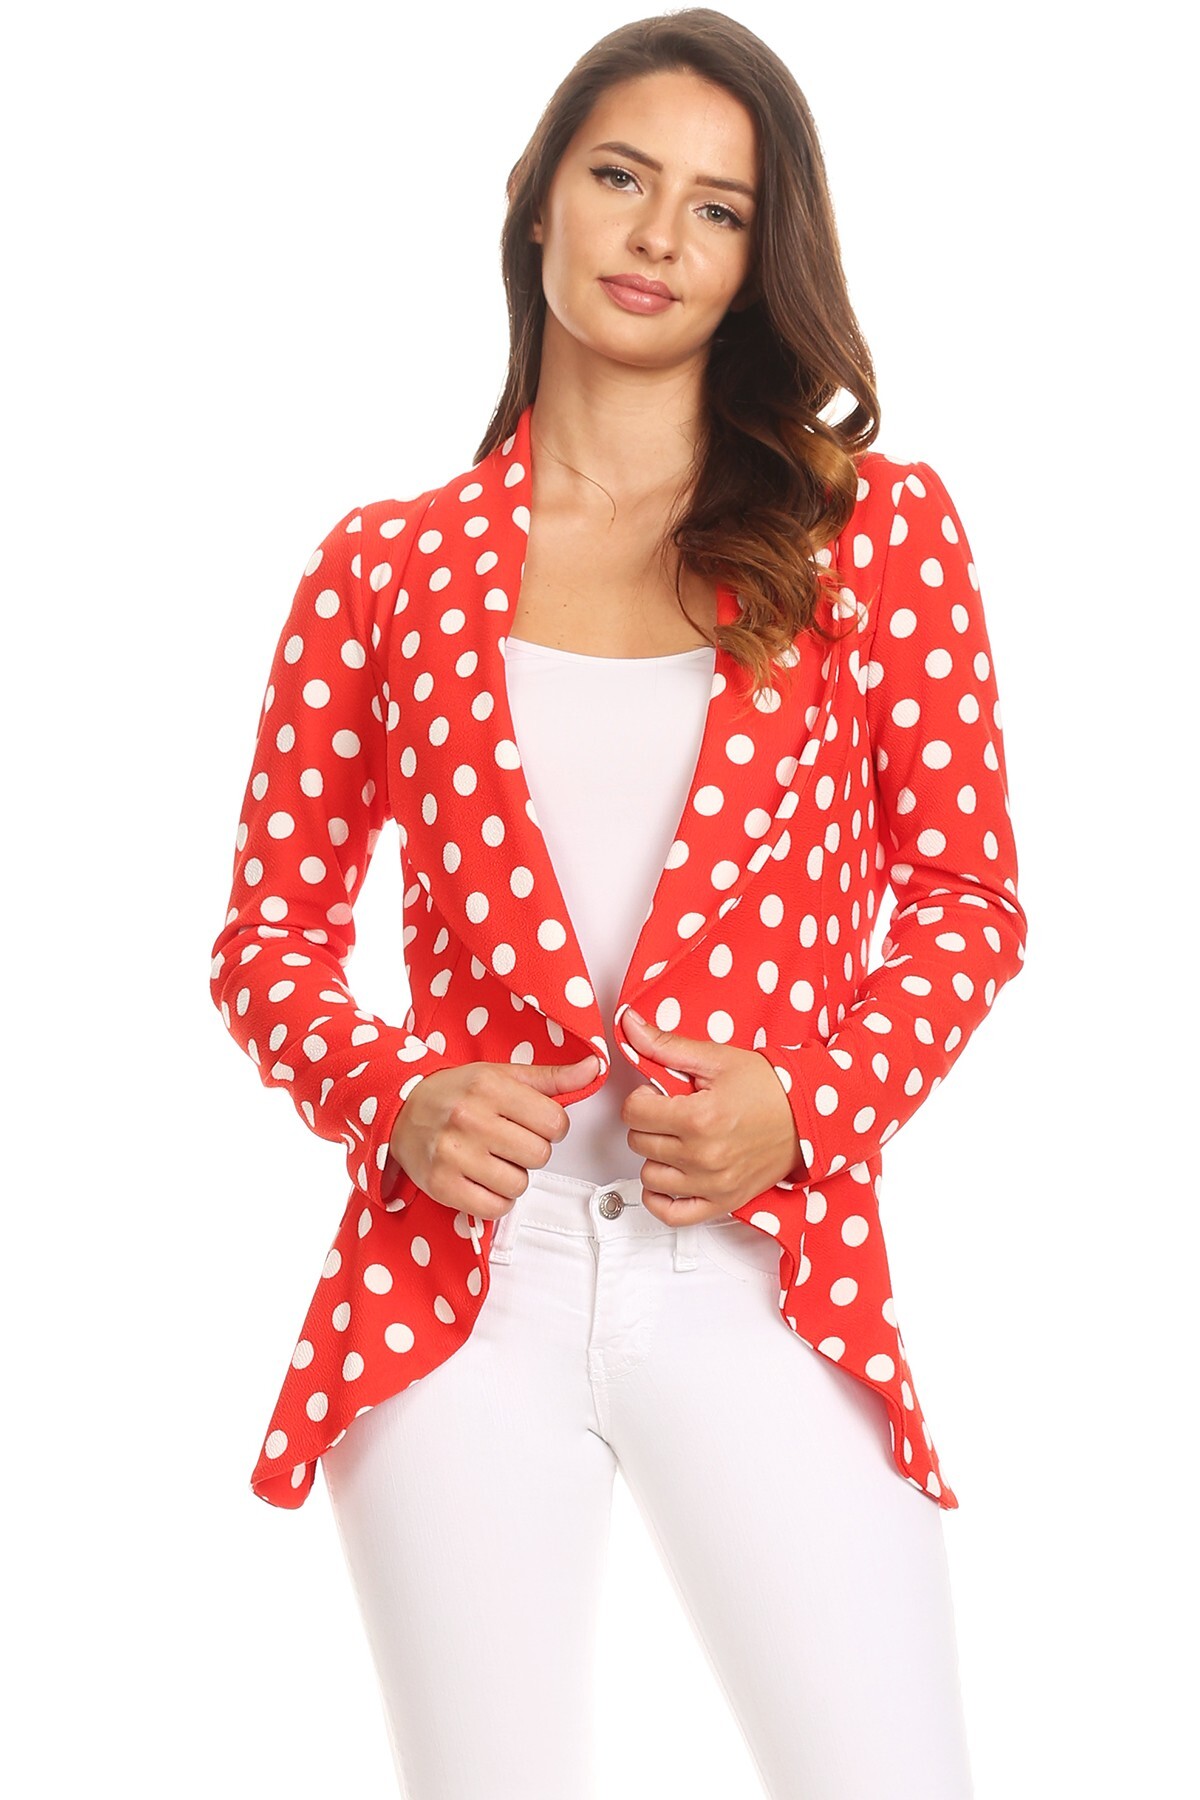 Selected Color is Medium Polka Red White